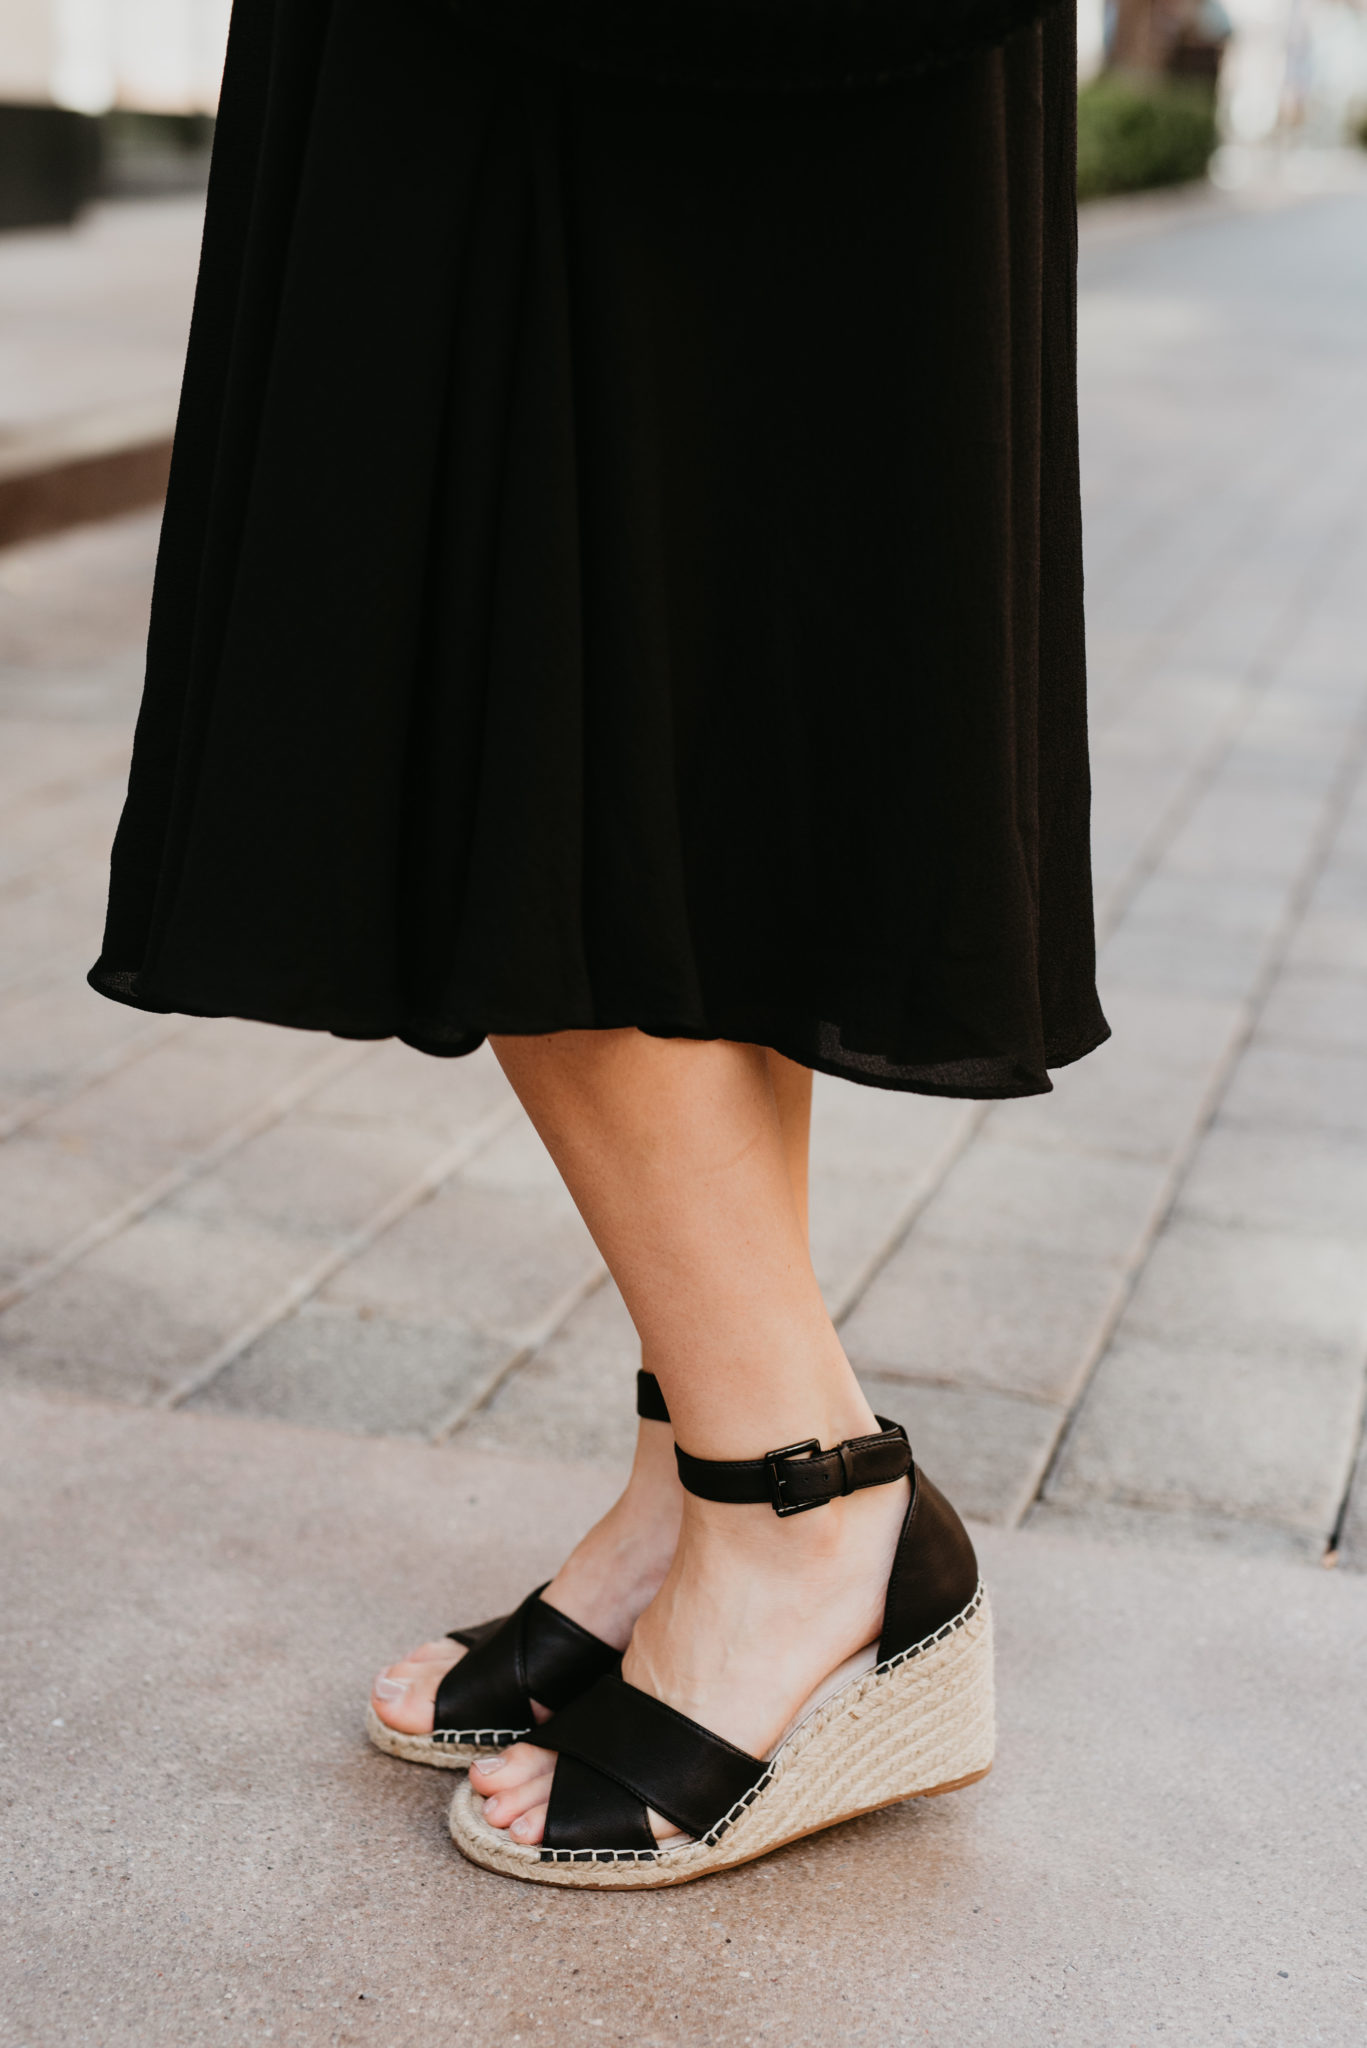 Cute Spring dress look styled by top US fashion blog, Outfits & Outings: image of a woman wearing a black Gal Meets Glam midi dress, Caslon espadrille sandals, and a Clare V straw bag